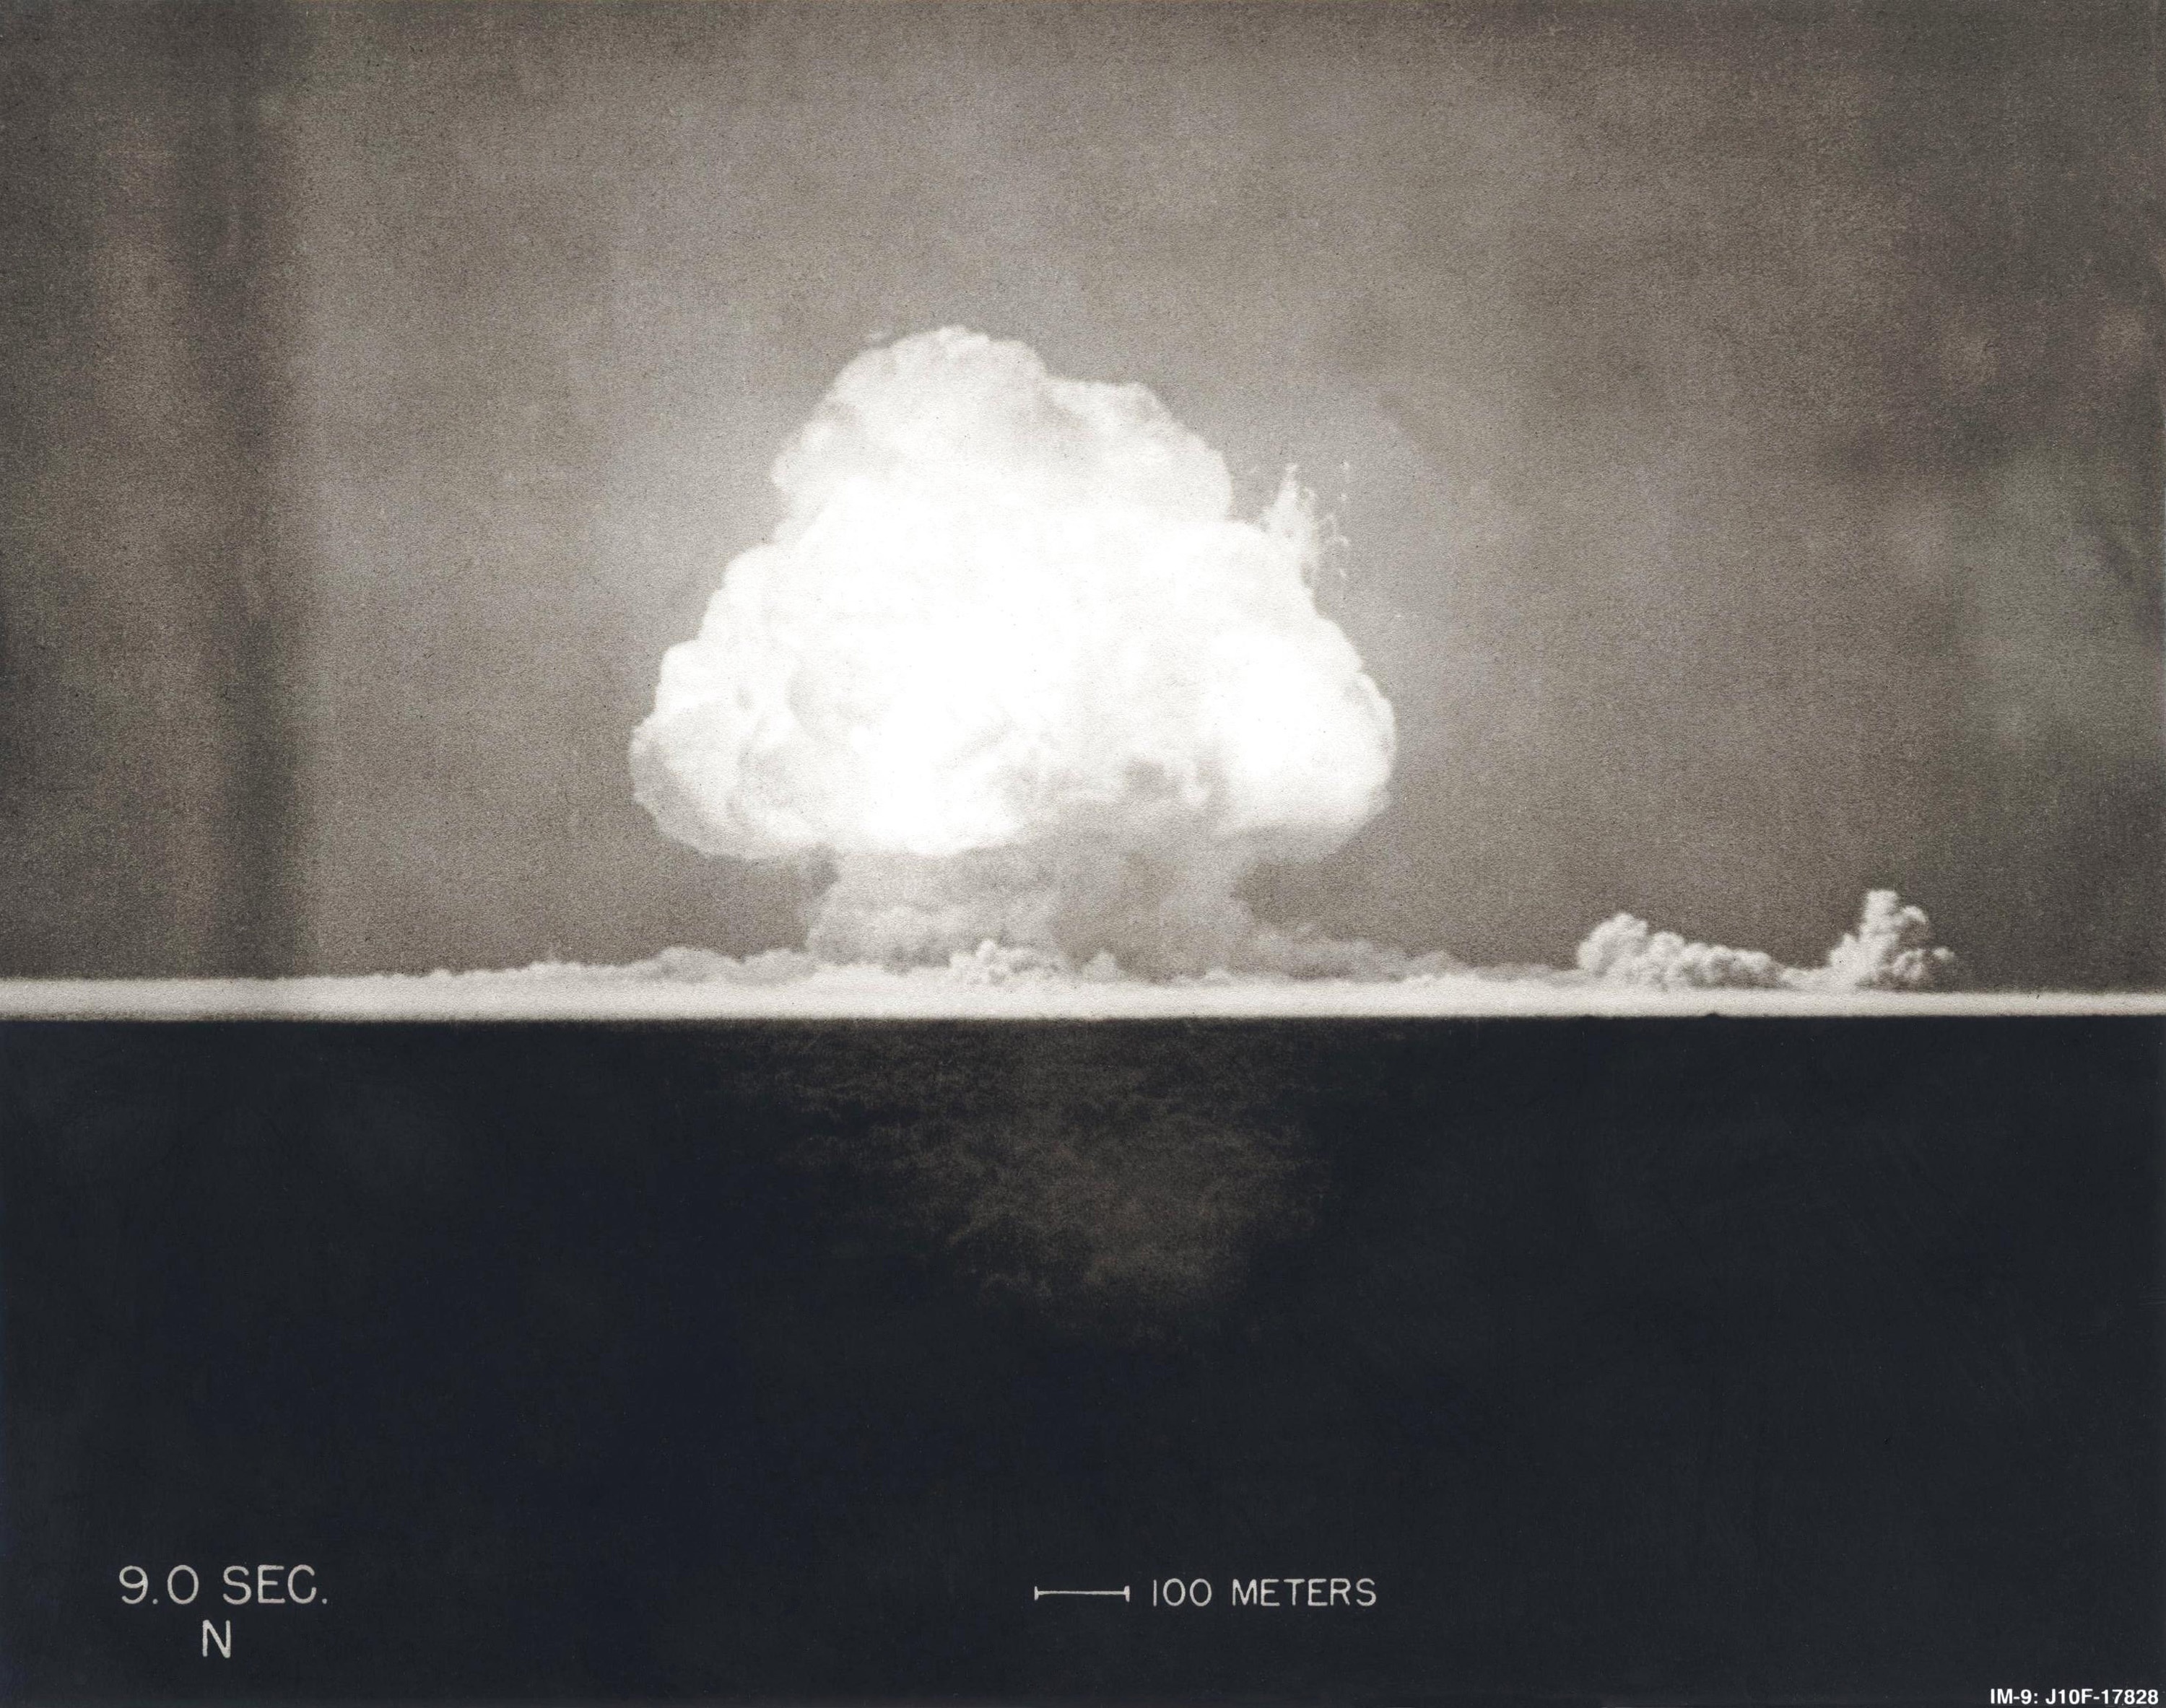 The Trinity explosion, nine seconds after detonation, on July 16, 1945. (Everett Collection)